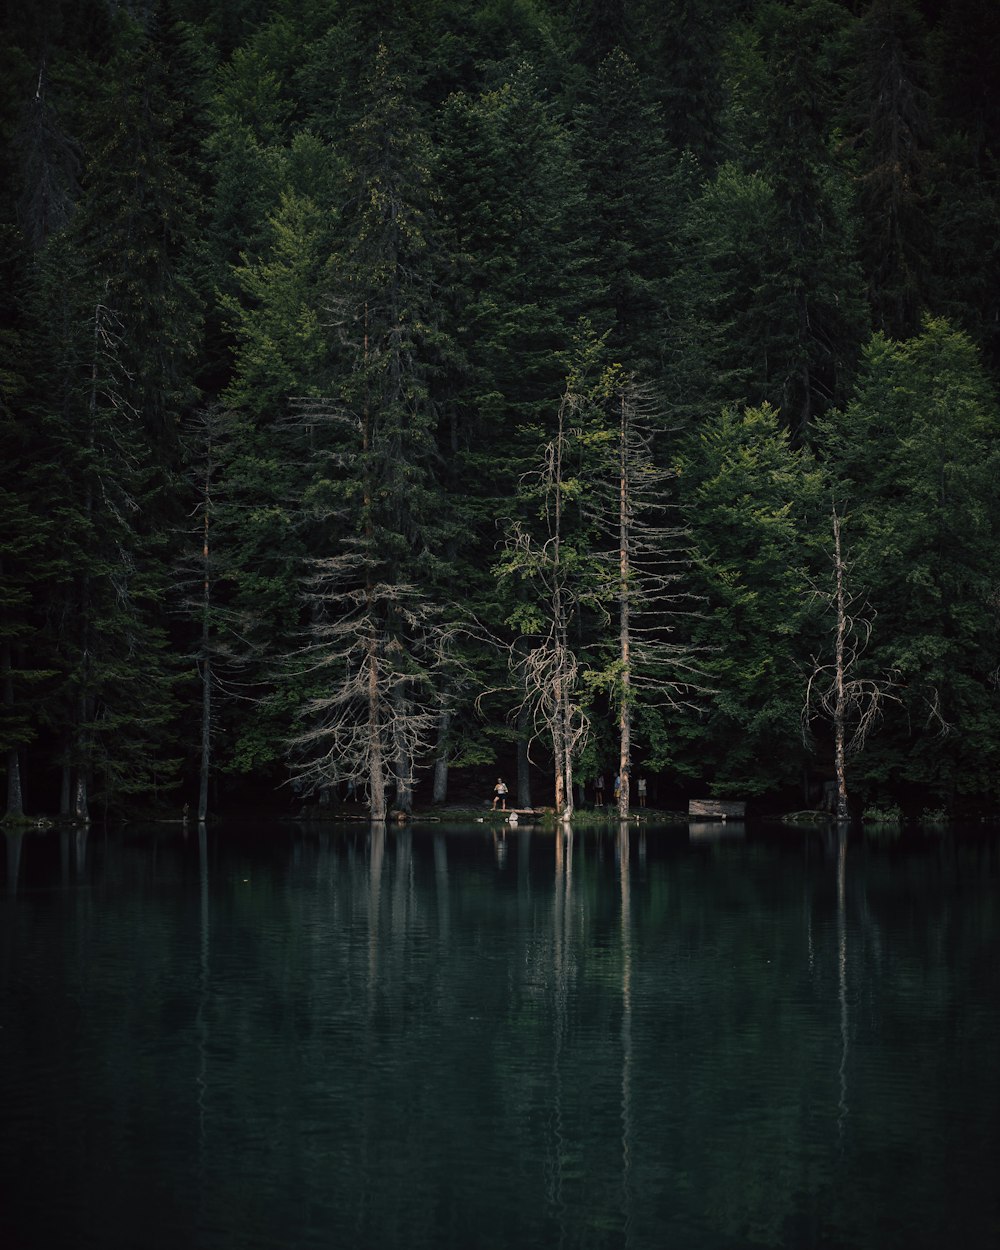 a large body of water surrounded by trees